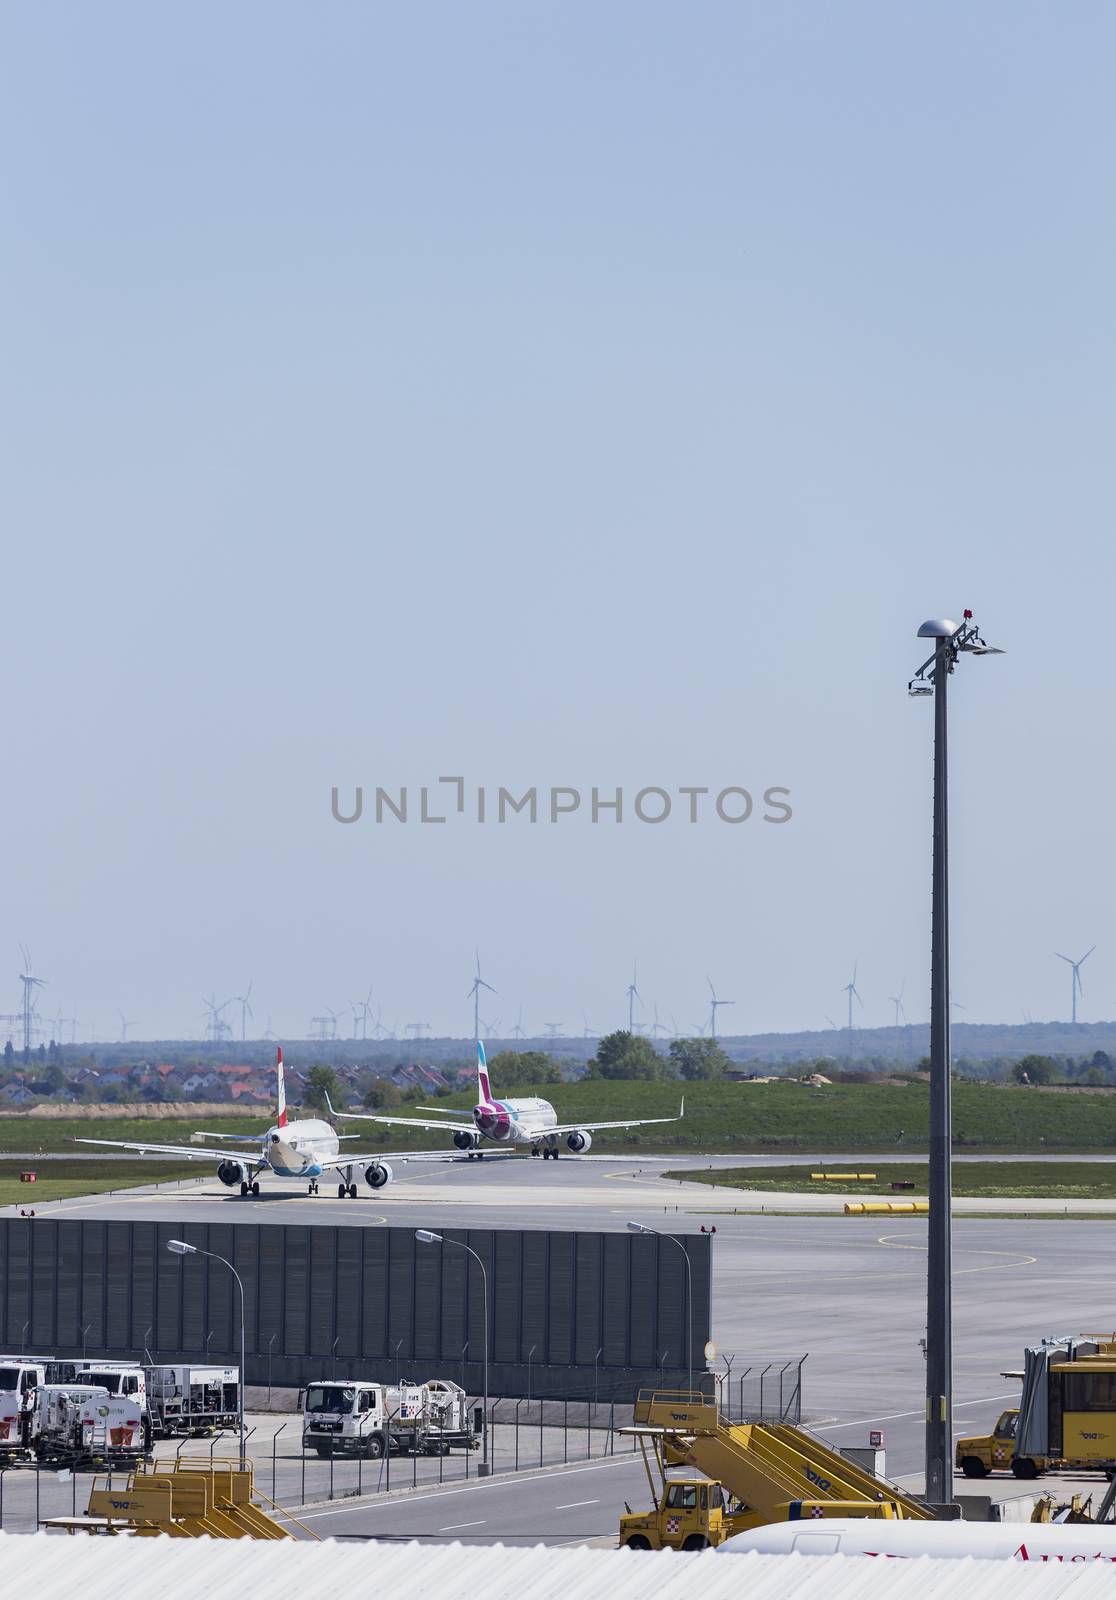 VIENNA, AUSTRIA – APRIL 30th 2016: Planes lined up a busy Saturday ready for take off at Vienna International Airport.